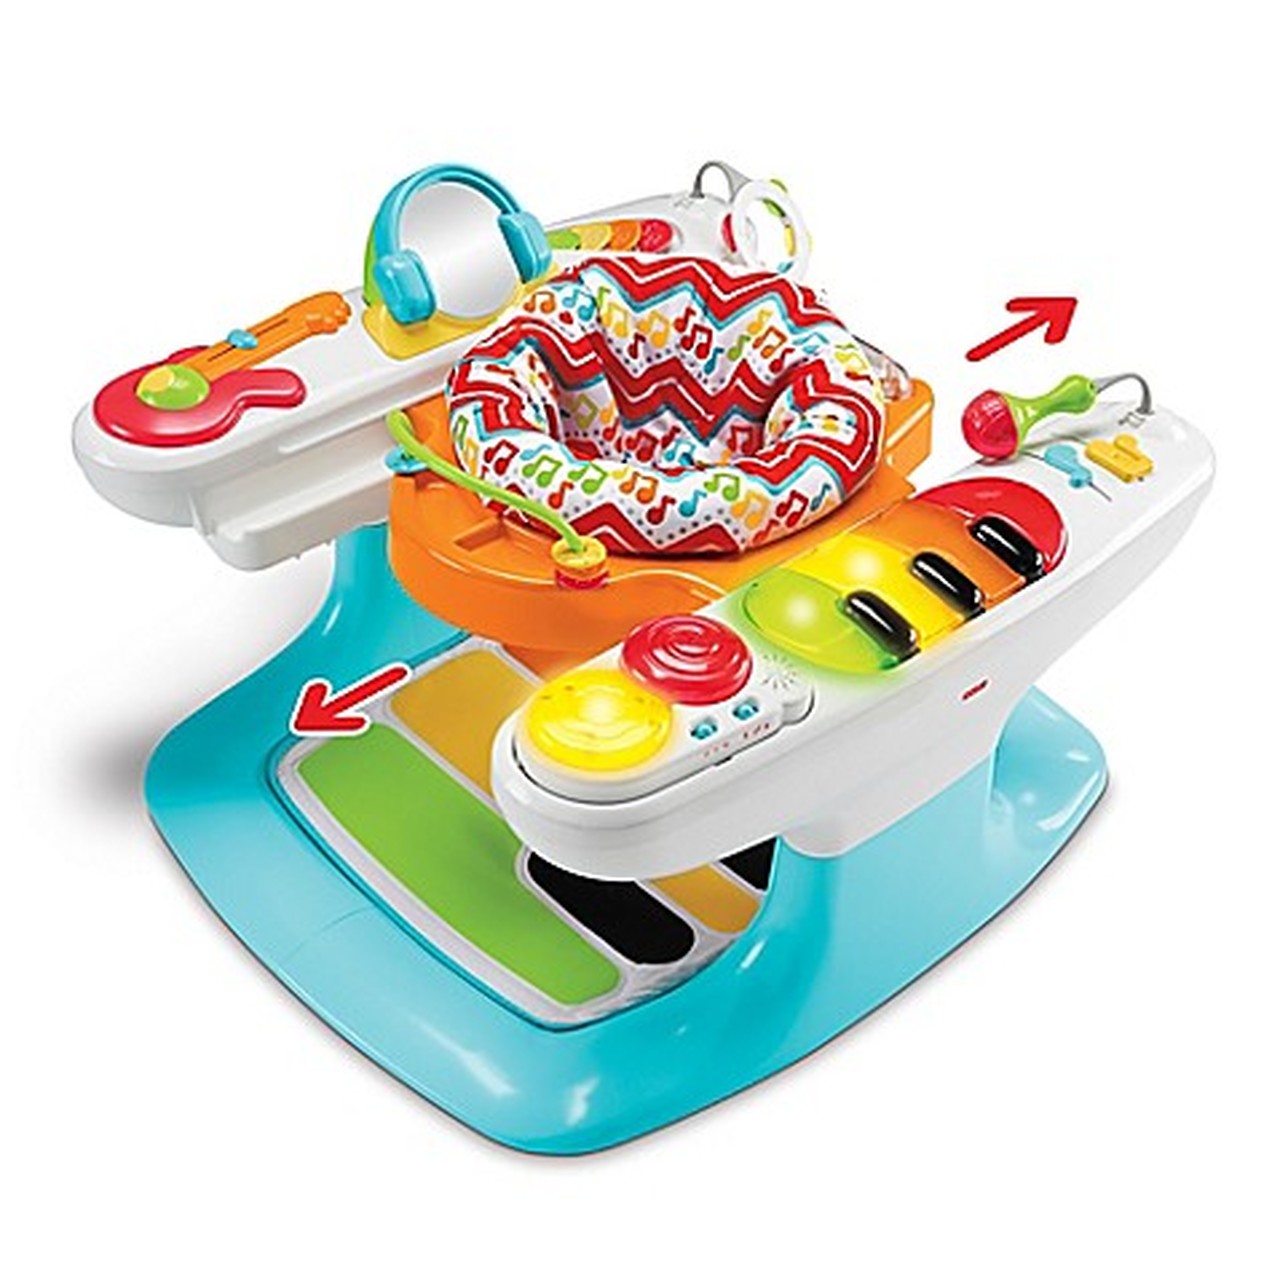 Fisher-Price Entertainer 4-in-1 Step 'n Play Piano Activity Seat